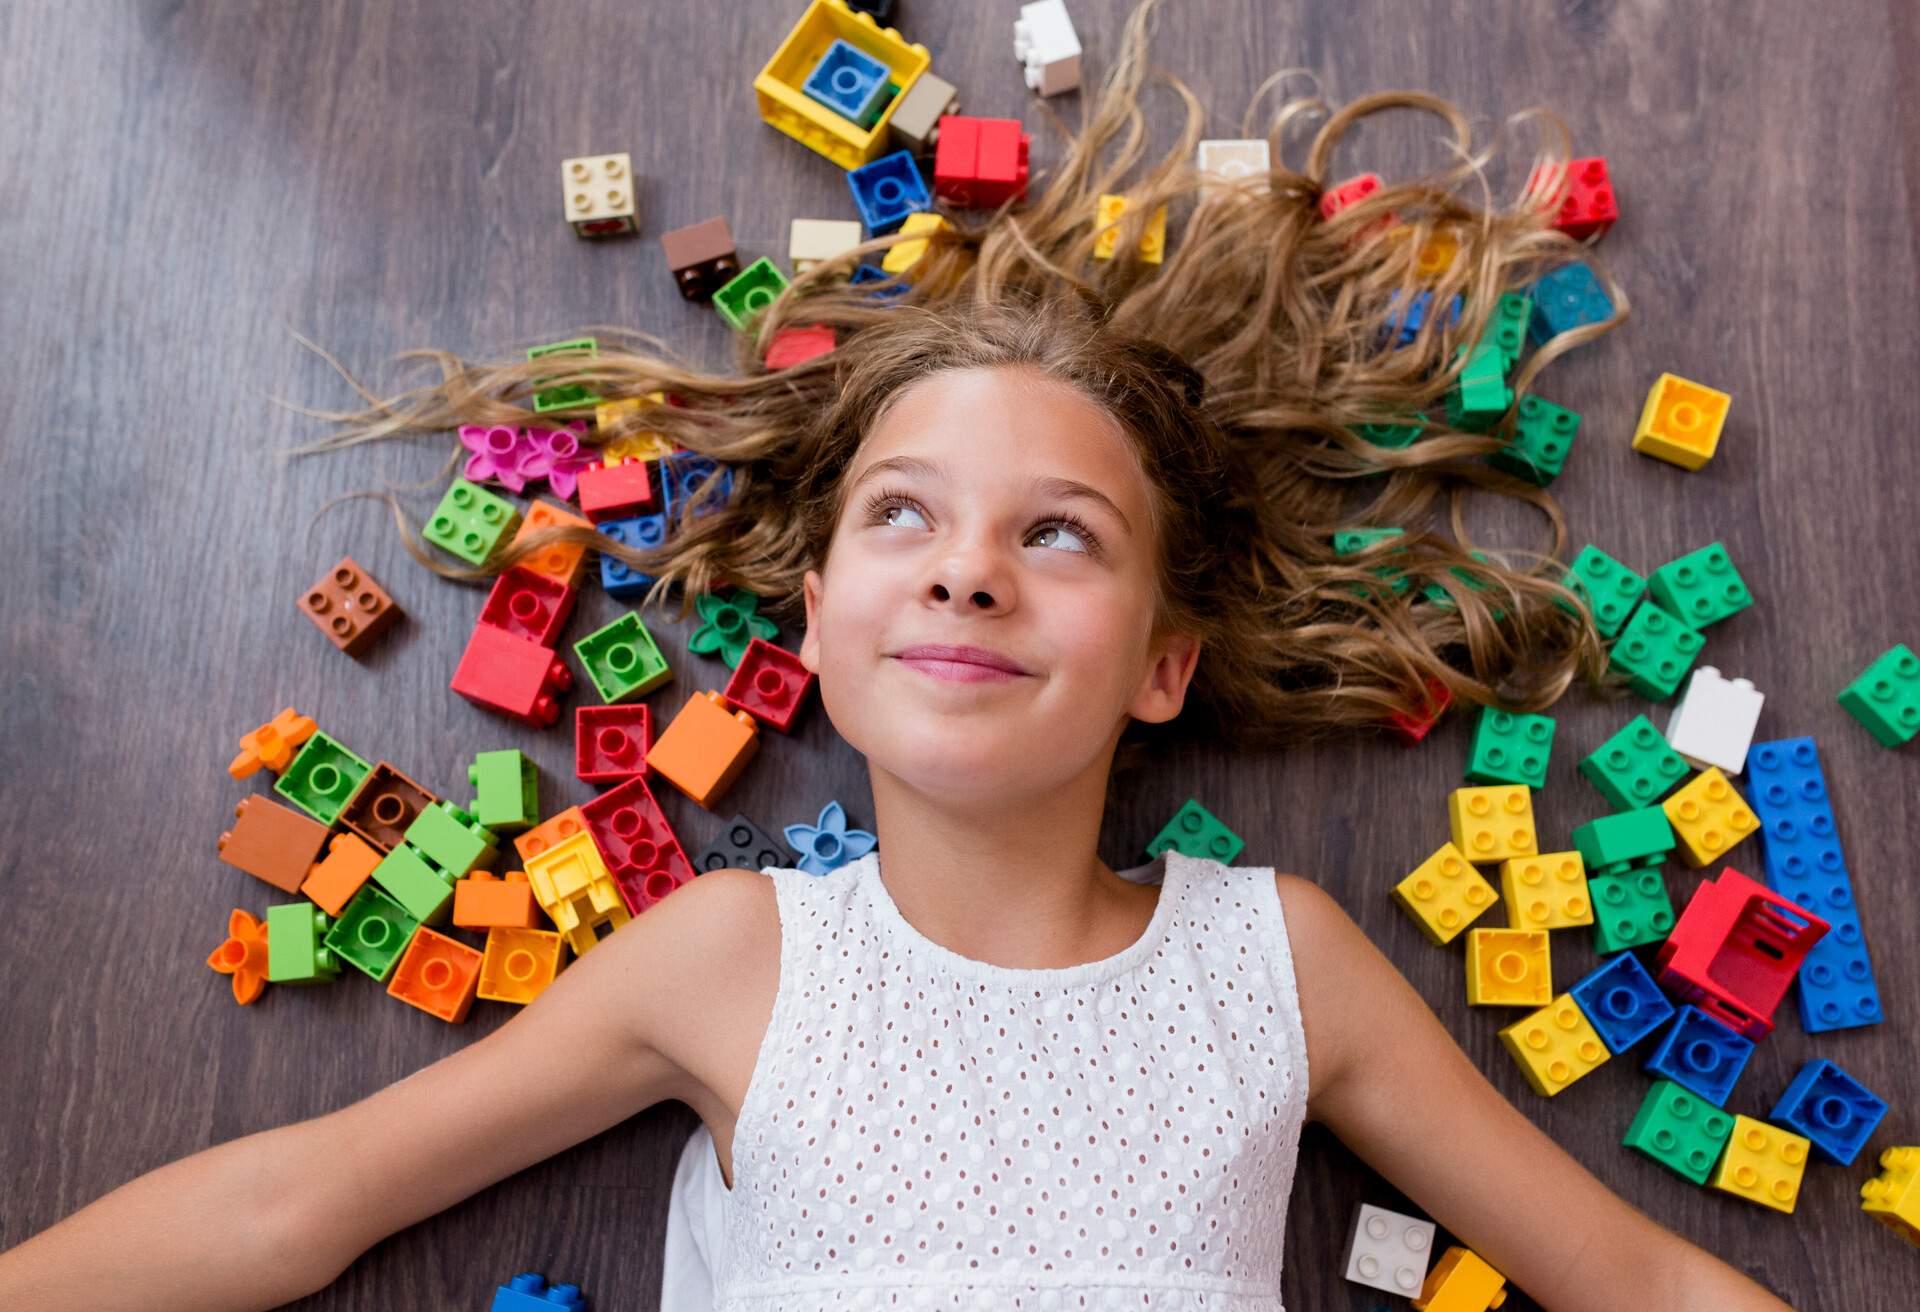 A girl in a white shirt lies on top of colourful Lego blocks.